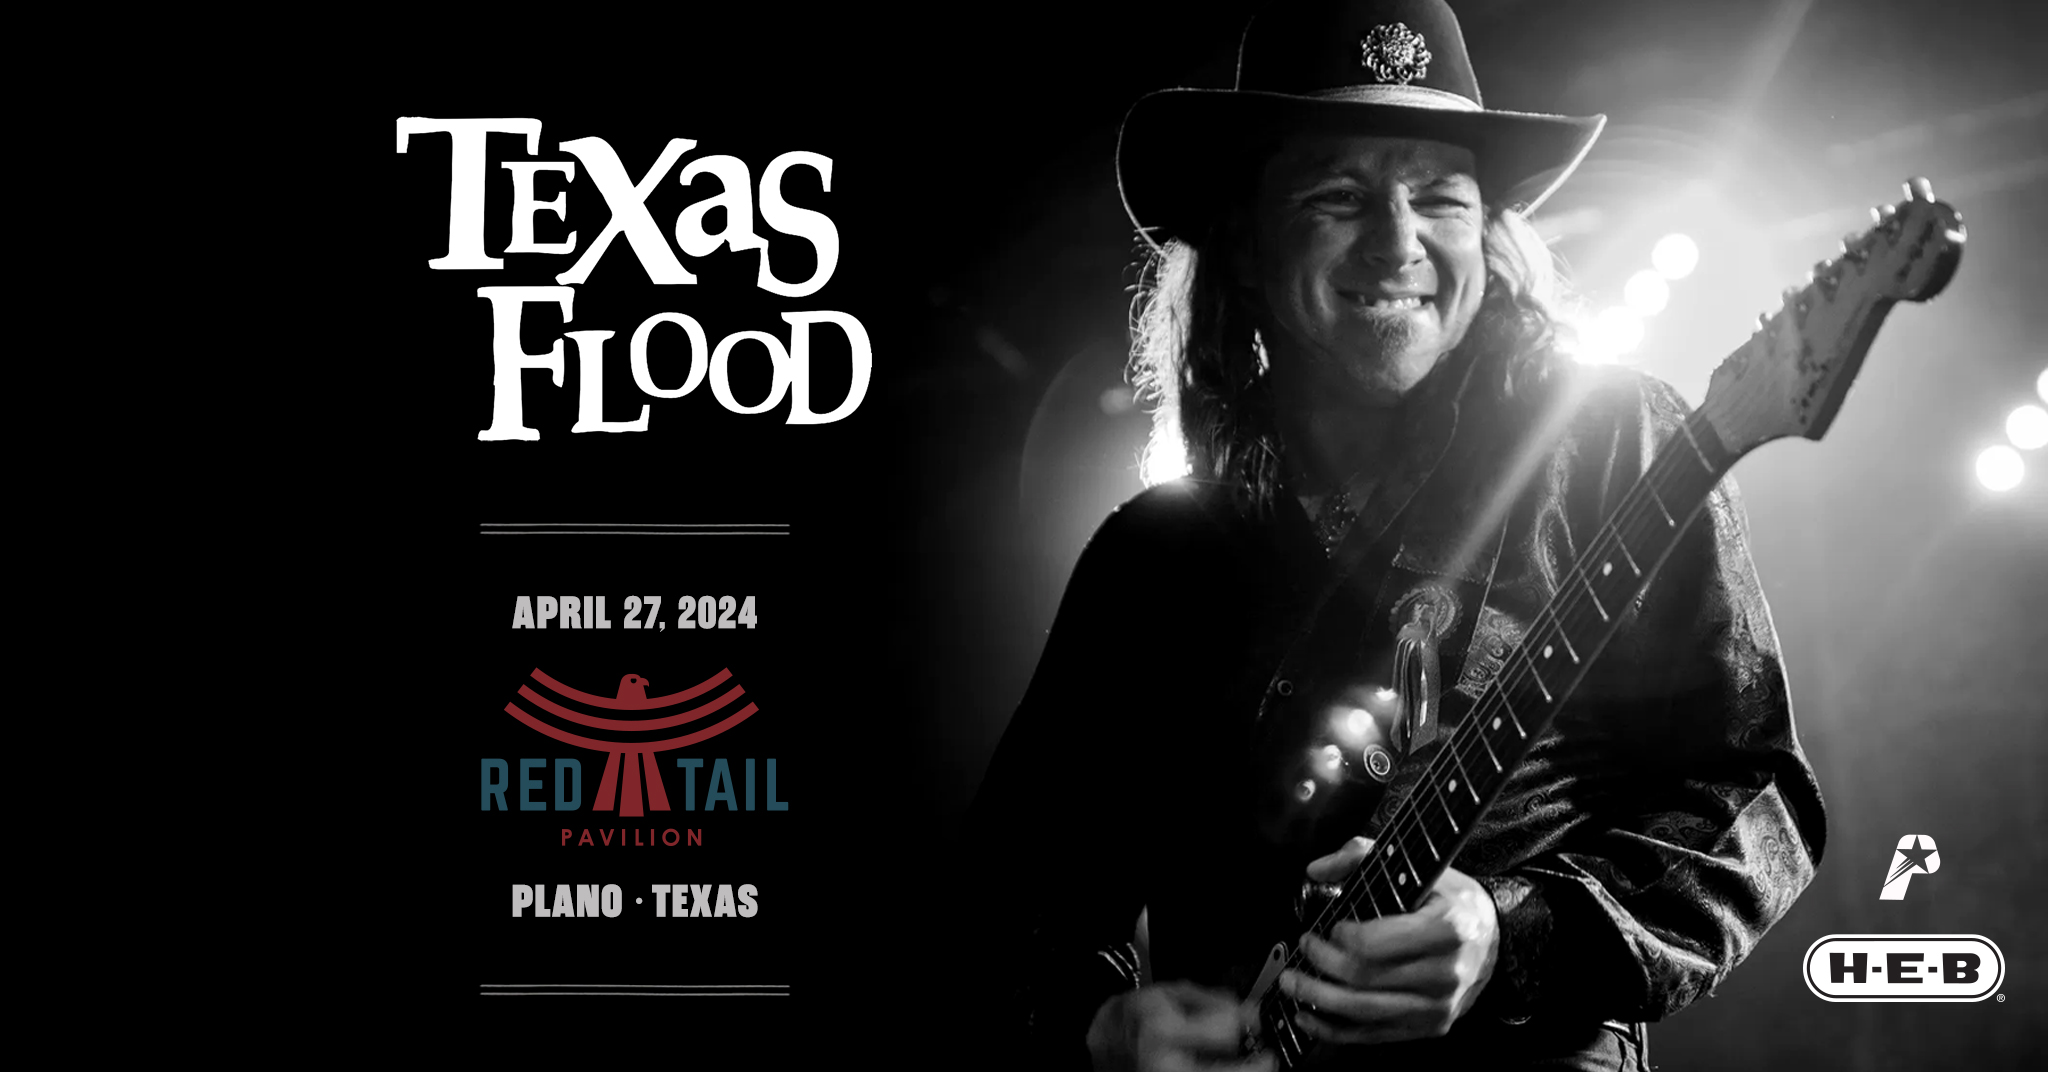 Texas Flood at Red Tail Pavilion